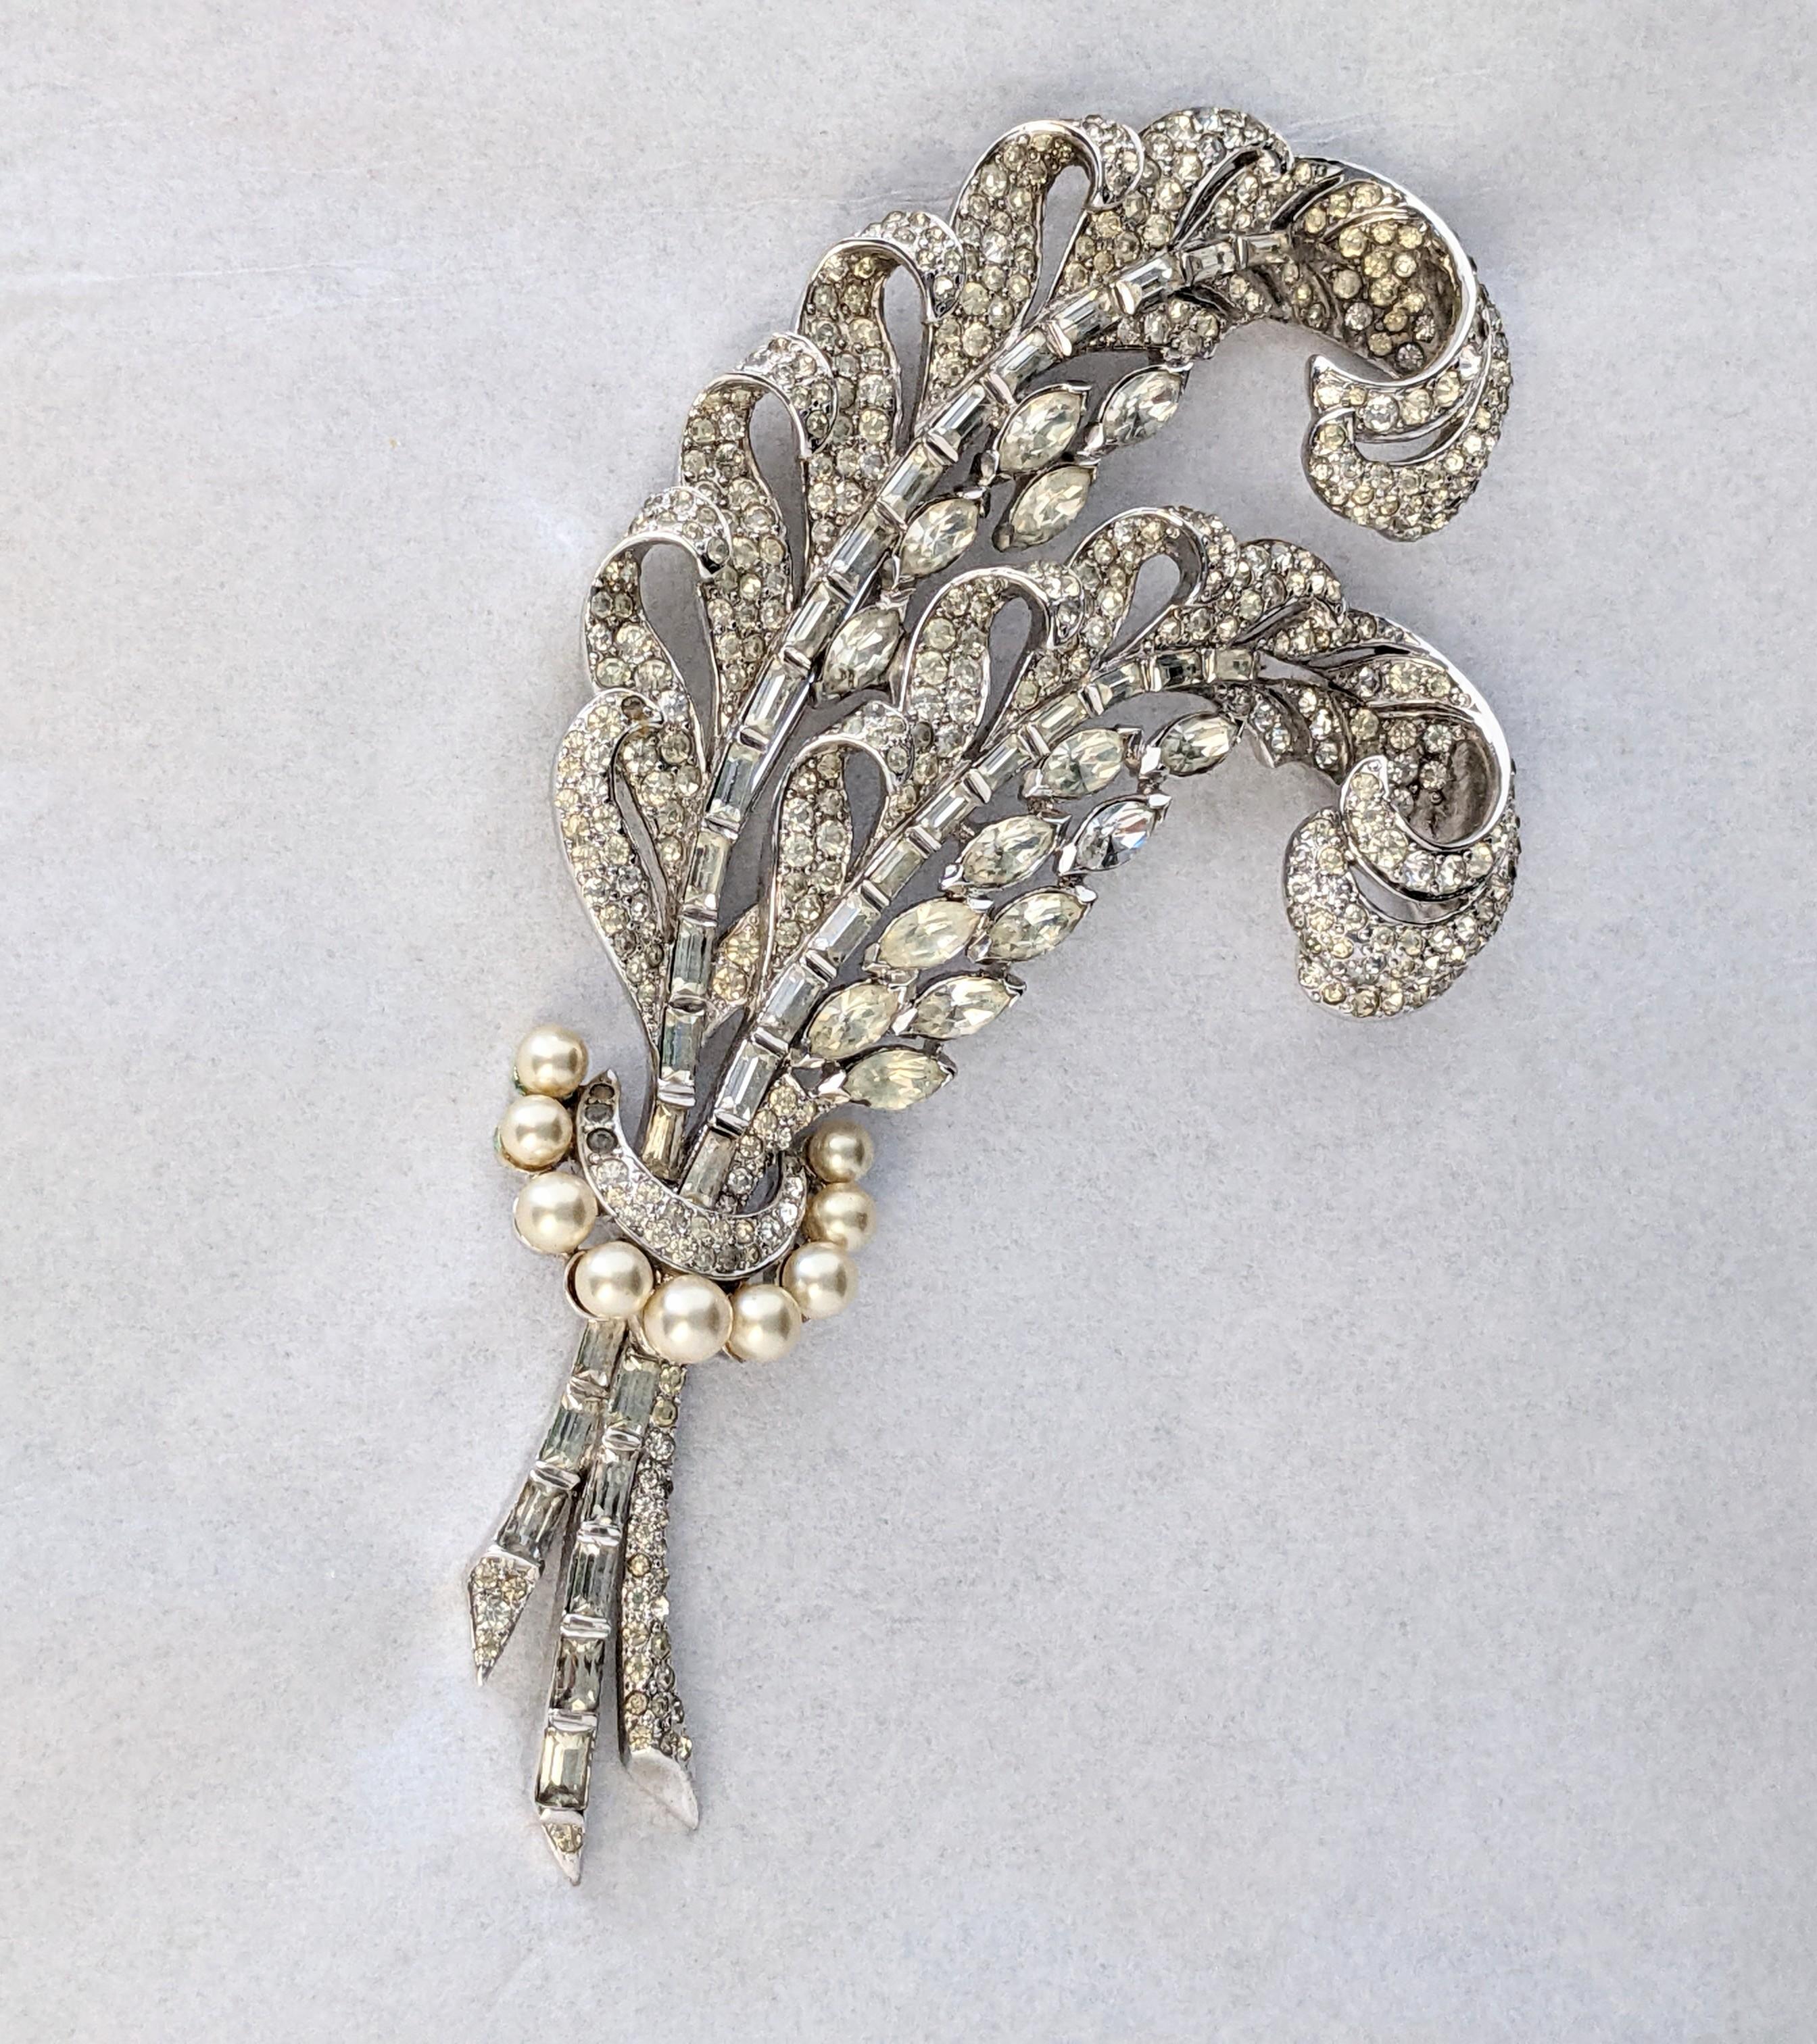 Magnificent, early Marcel Boucher Pave Feather Brooch of enormous scale from the 1930's. Beautifully detailed model with 3D pave work and graduated faux pearls. Based on 19th Century antique historical models but made for a 1930's clientelle. 